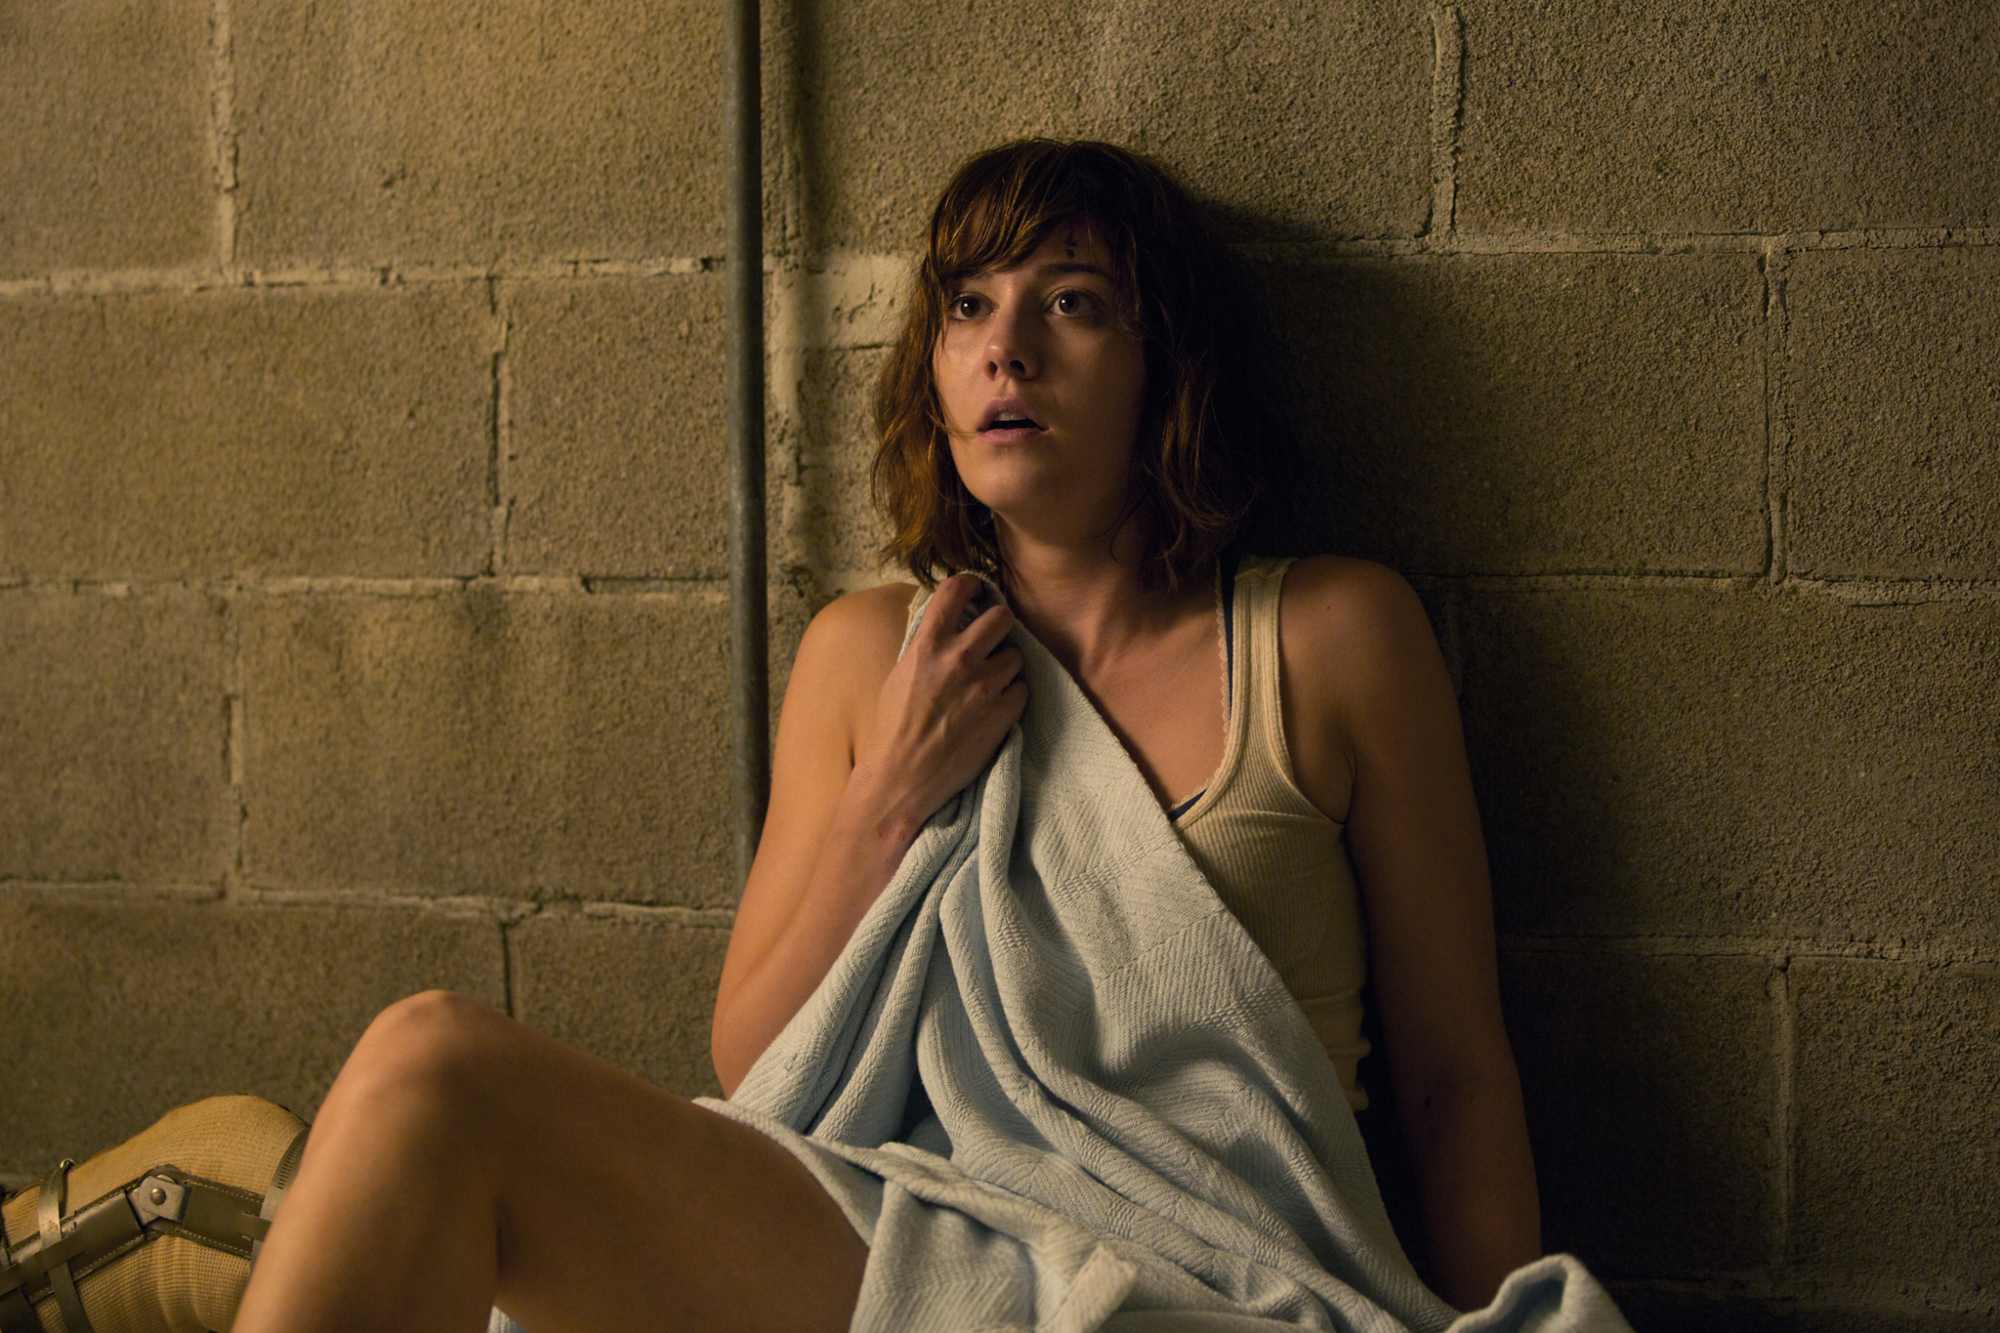 '10 Cloverfield Lane' Mary Elizabeth Winstead as Michelle looking terrified with her back against a wall, holding onto a blanket.